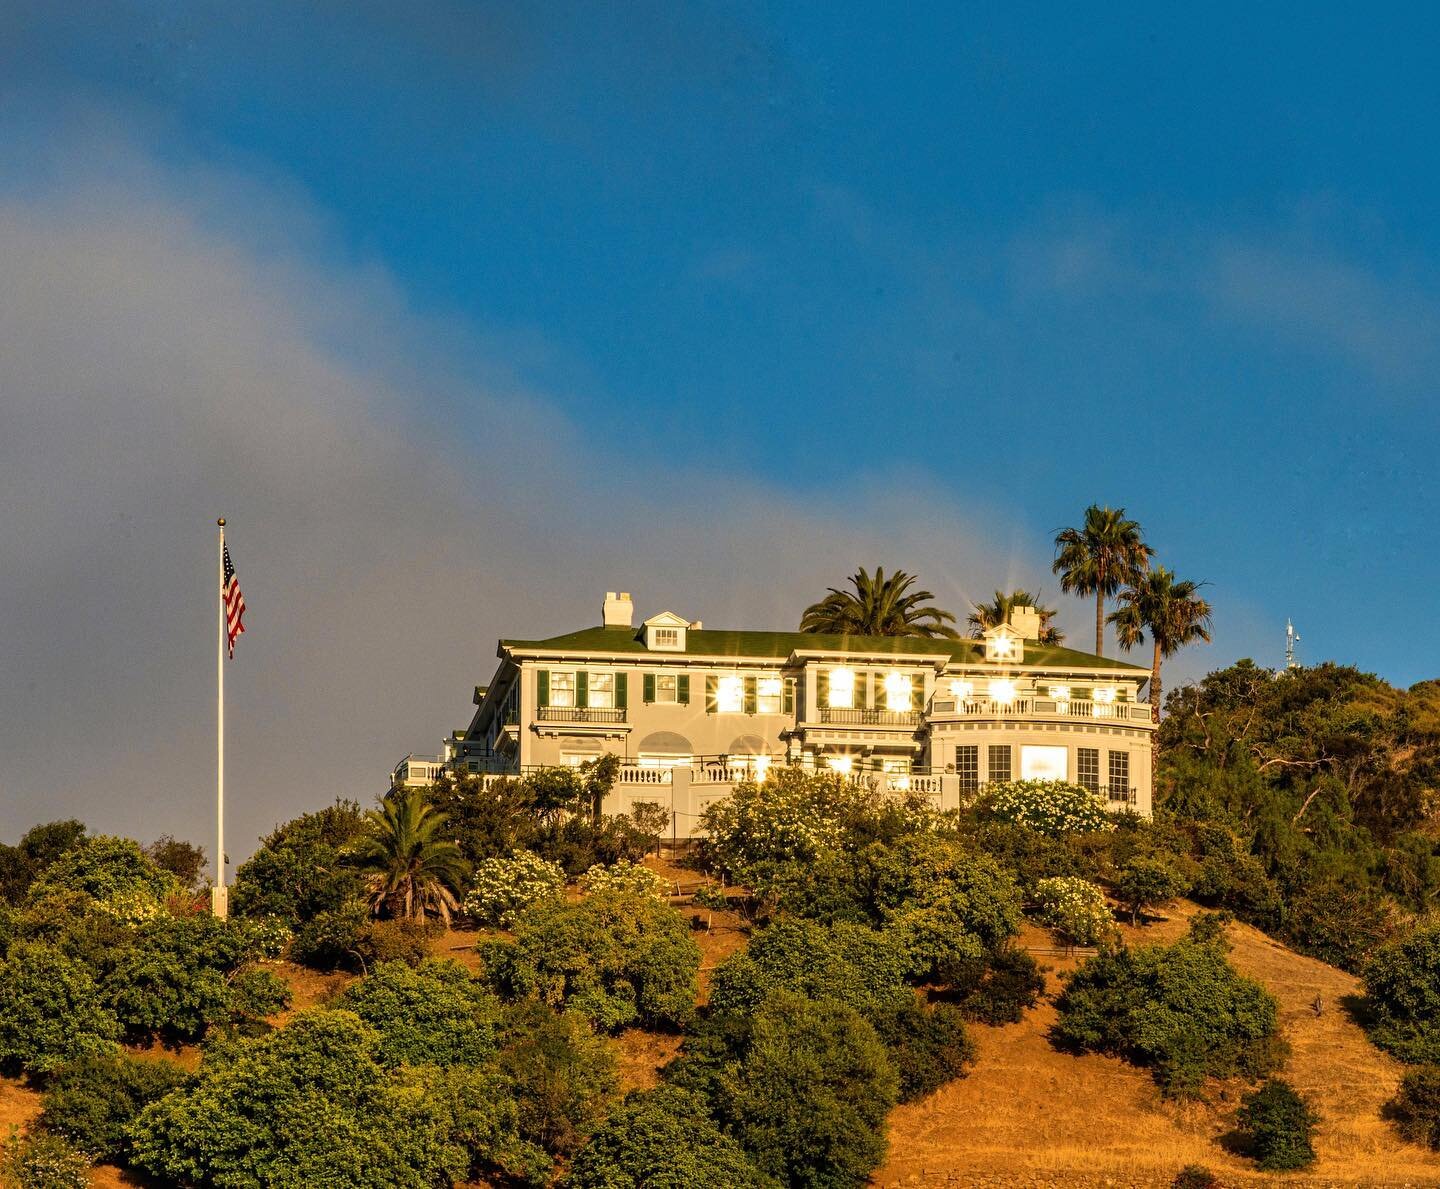 The William Wrigley Jr. Summer Cottage, or &quot;Mount Ada&quot;, is a historic residence located at 76 Wrigley Road in Avalon, on Santa Catalina Island, California. It was the former summer mansion and gardens of William Wrigley Jr. (1861&ndash;1932